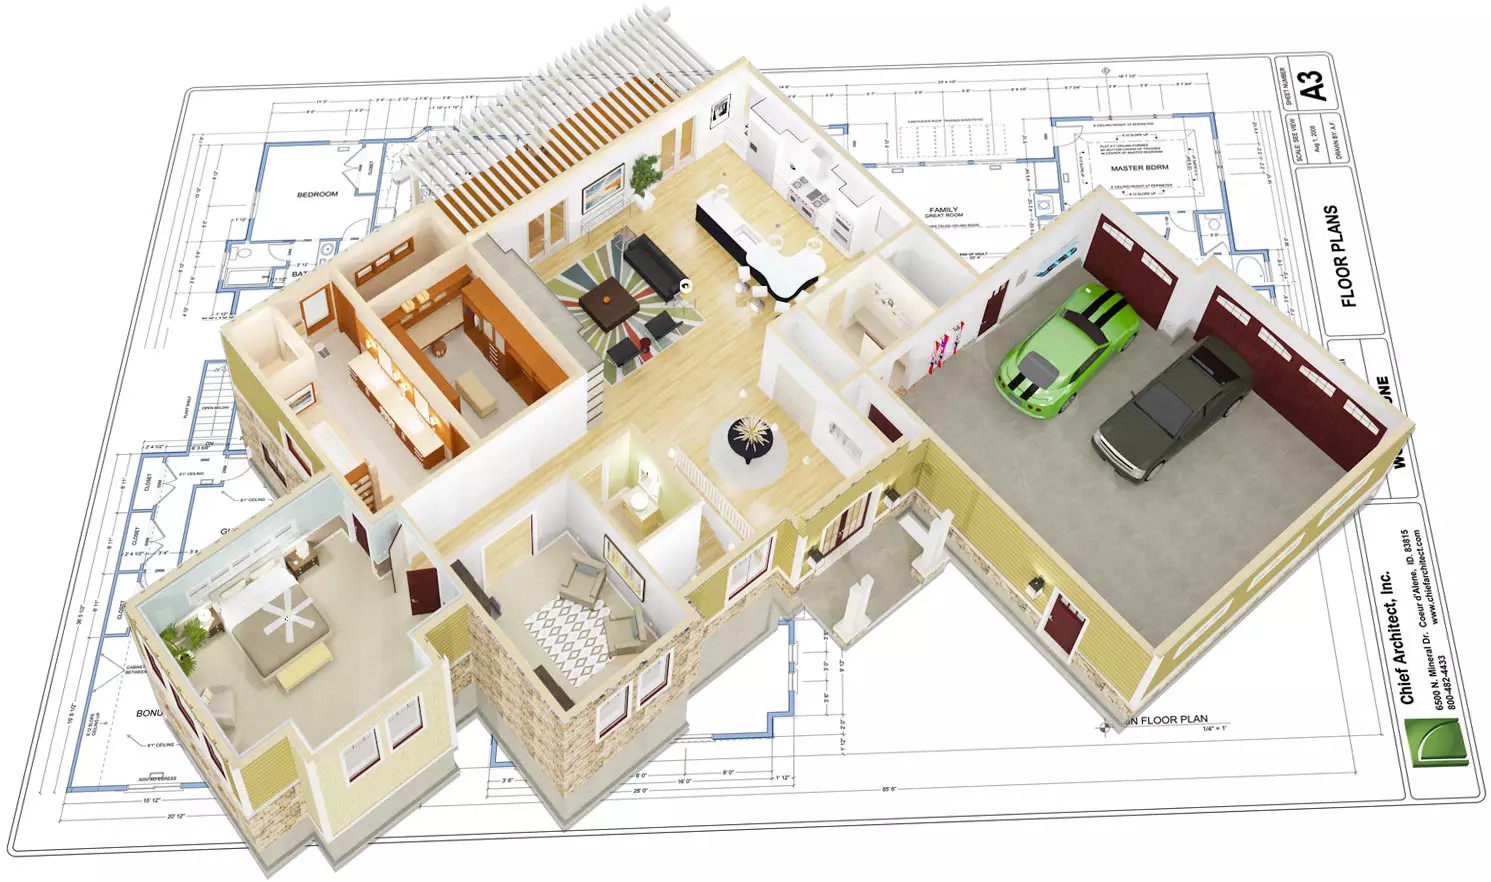 What are the benefits of architecture software for your interior business?